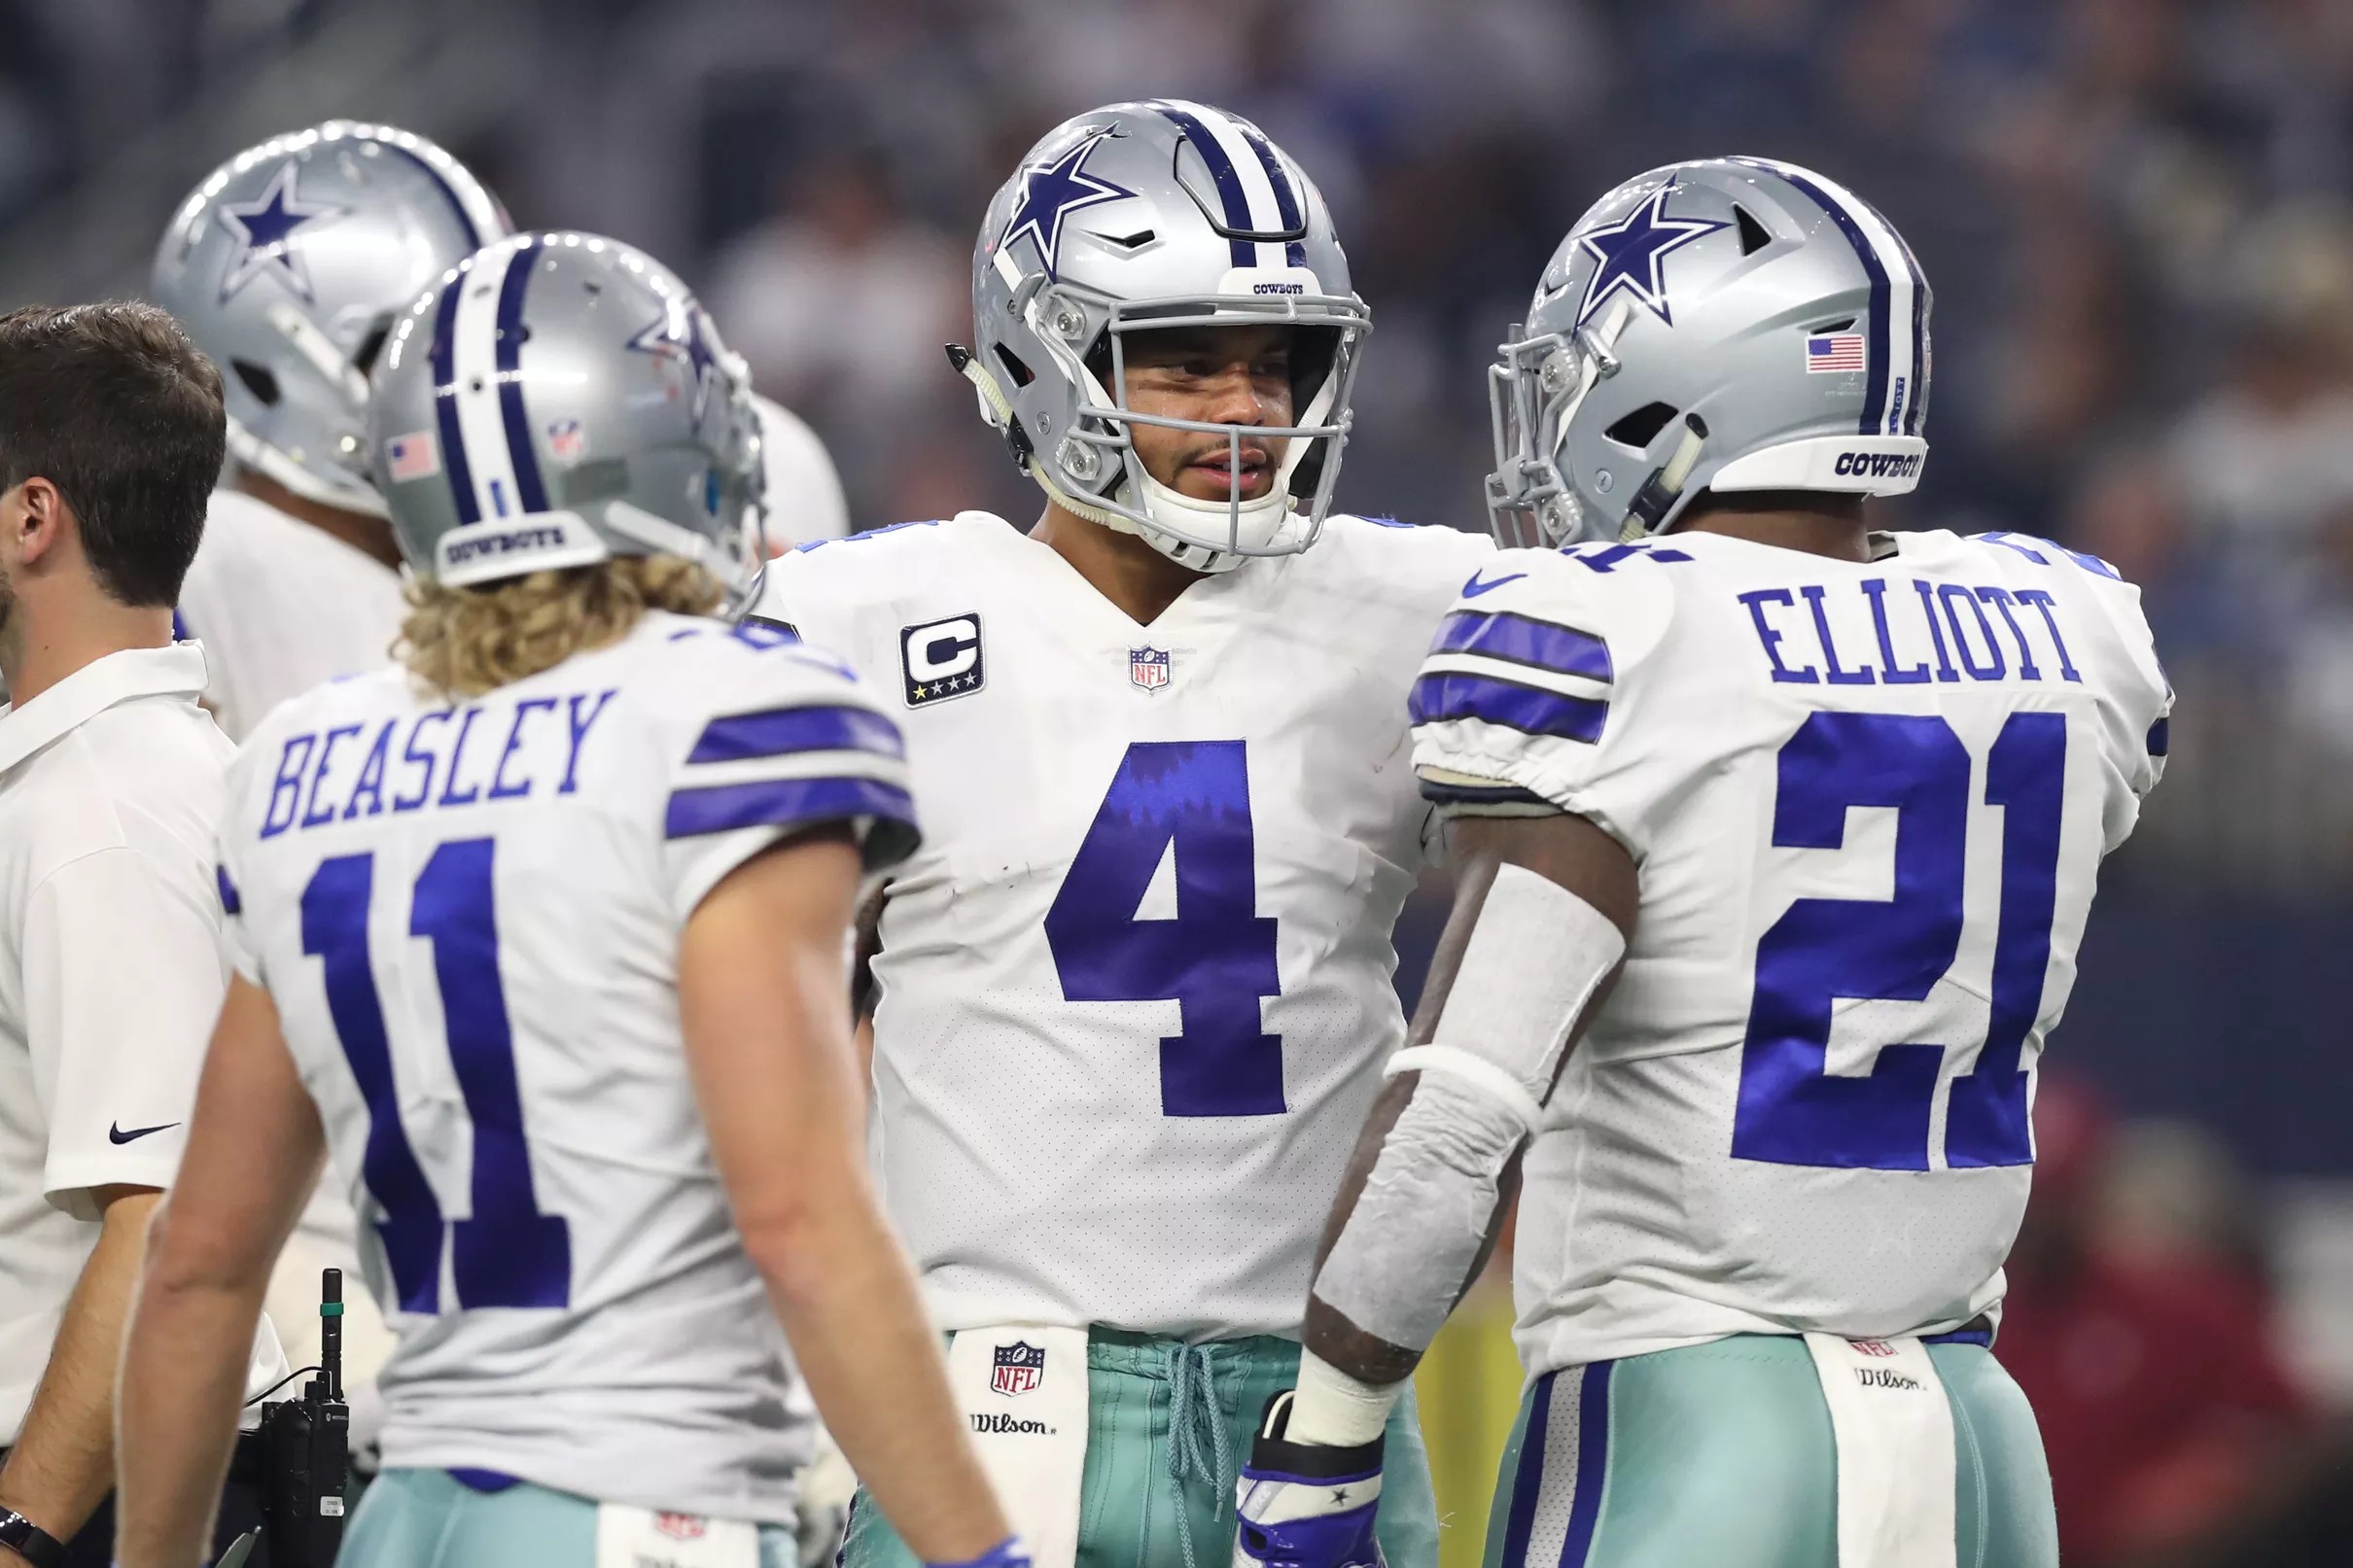 Do you agree with projected starting lineup for the Cowboys?